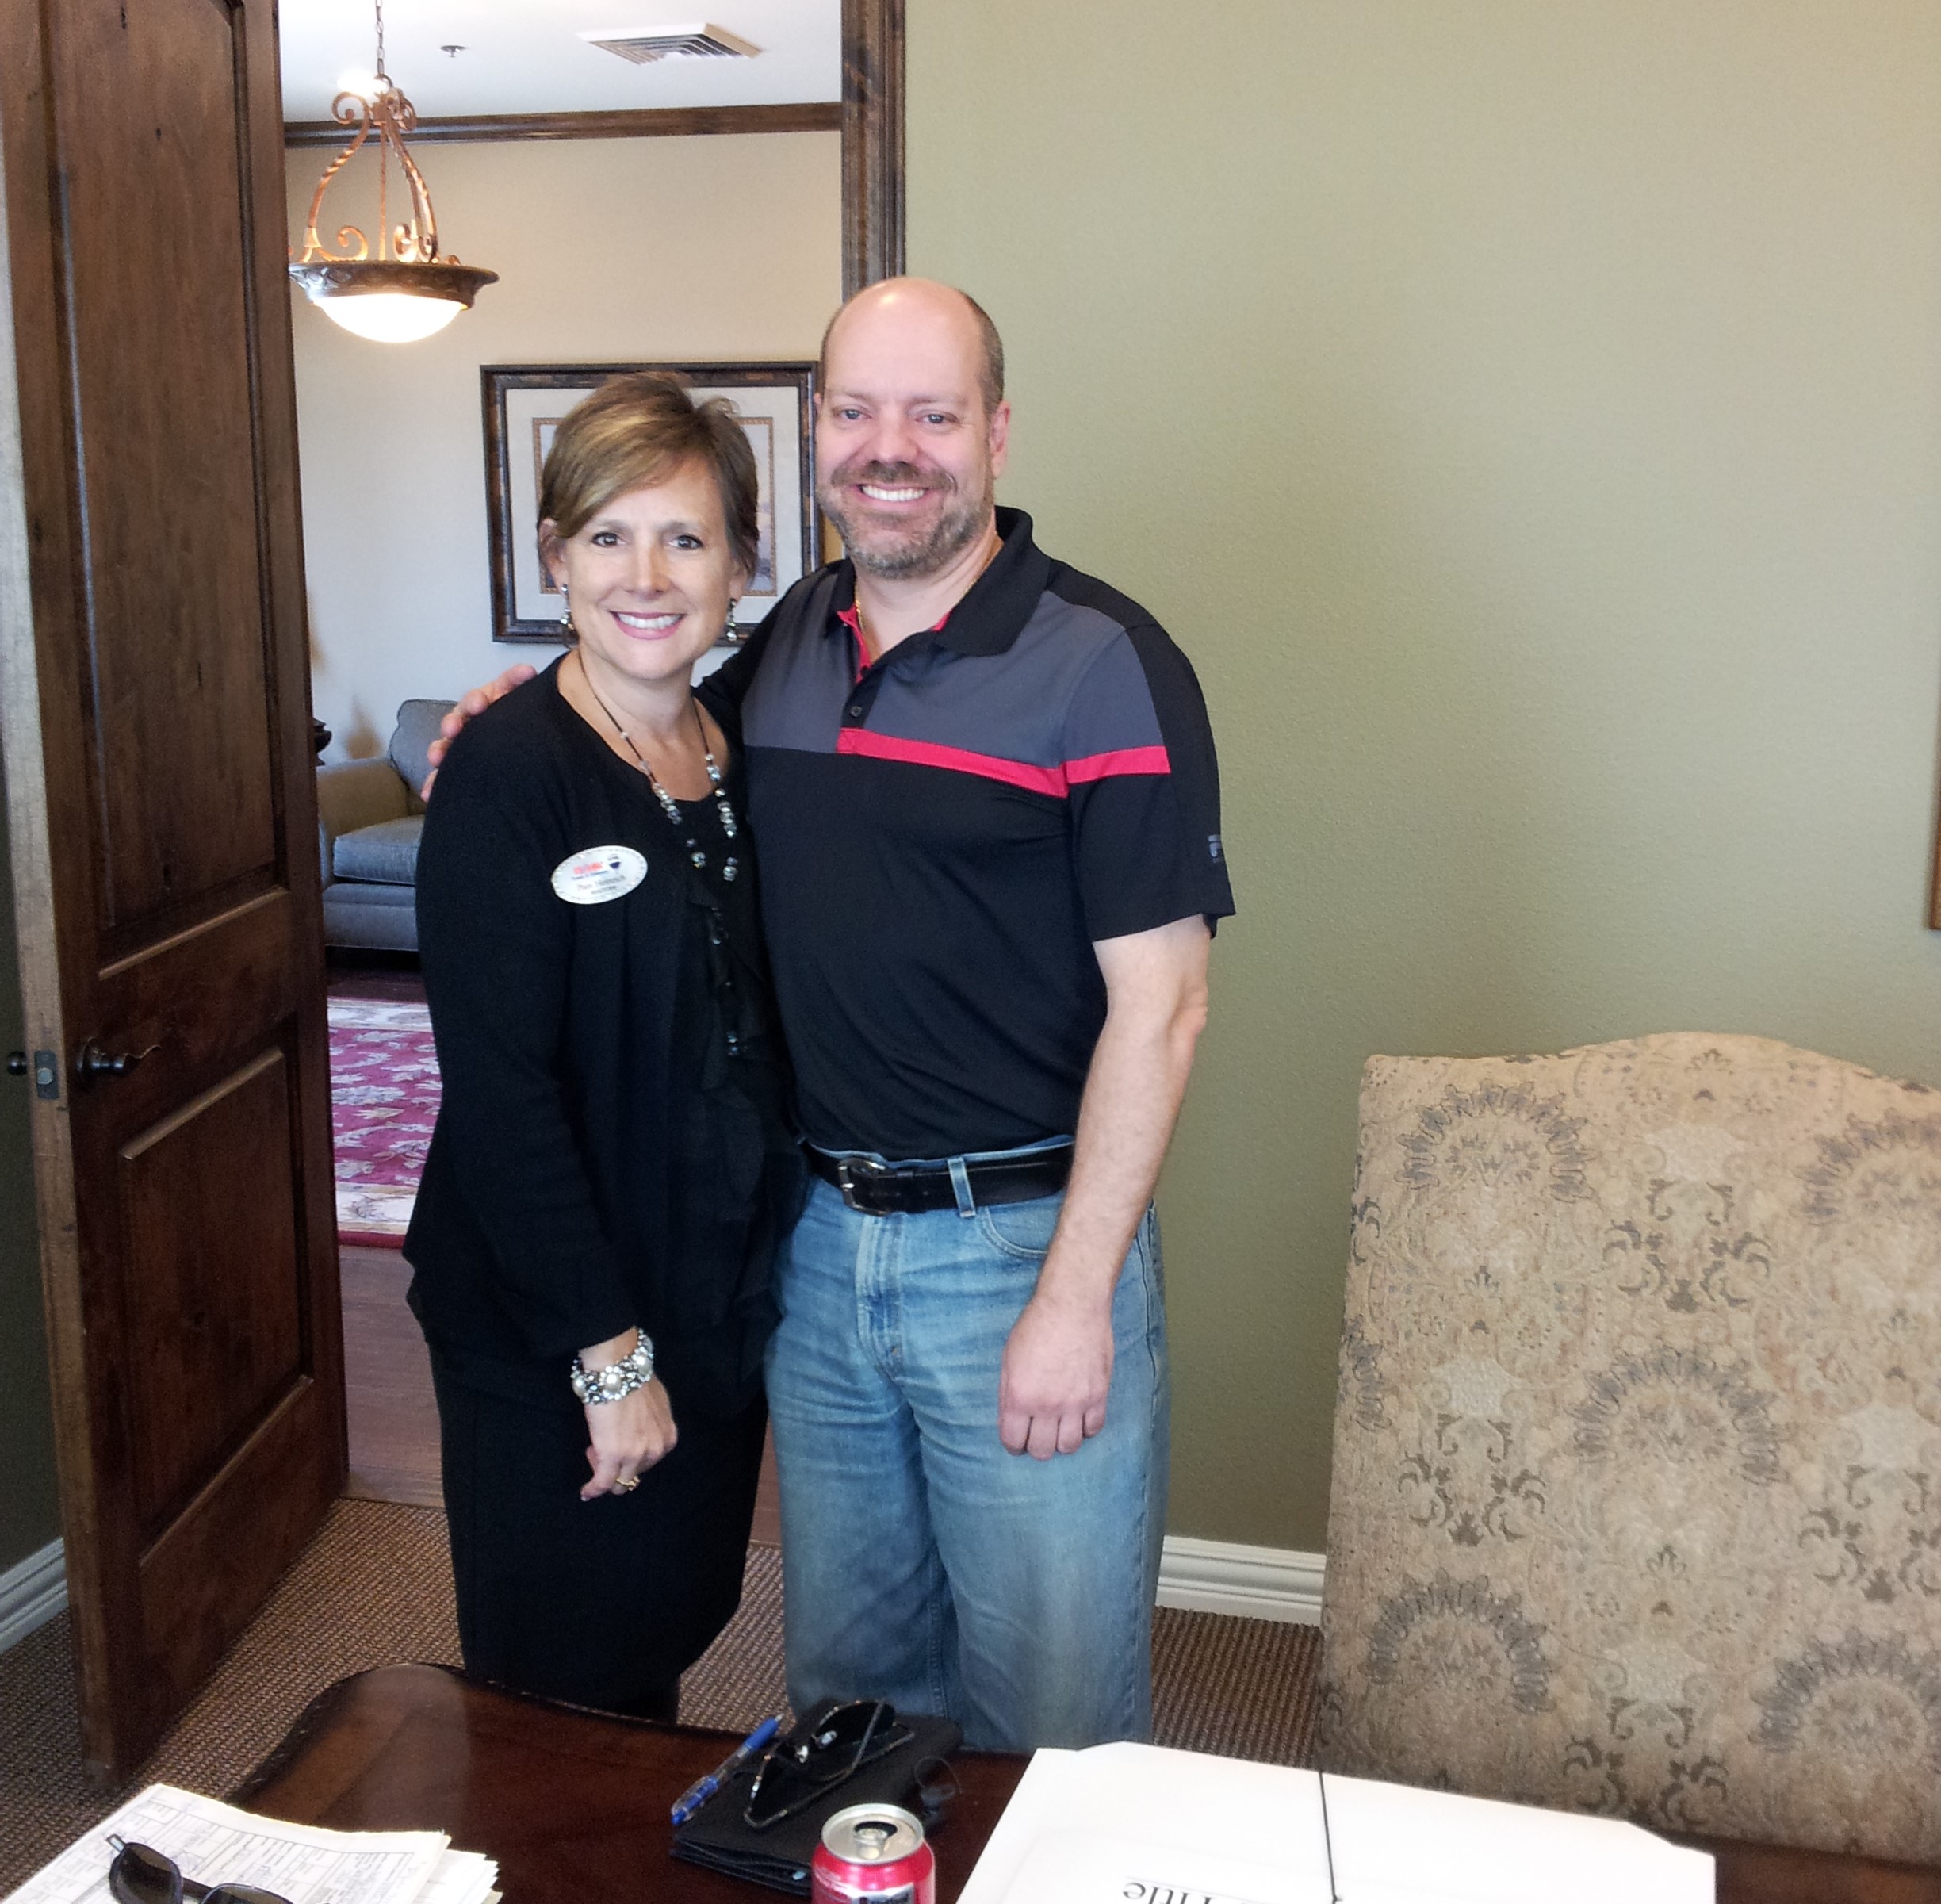 She helped us sell two houses and buy our dream home!